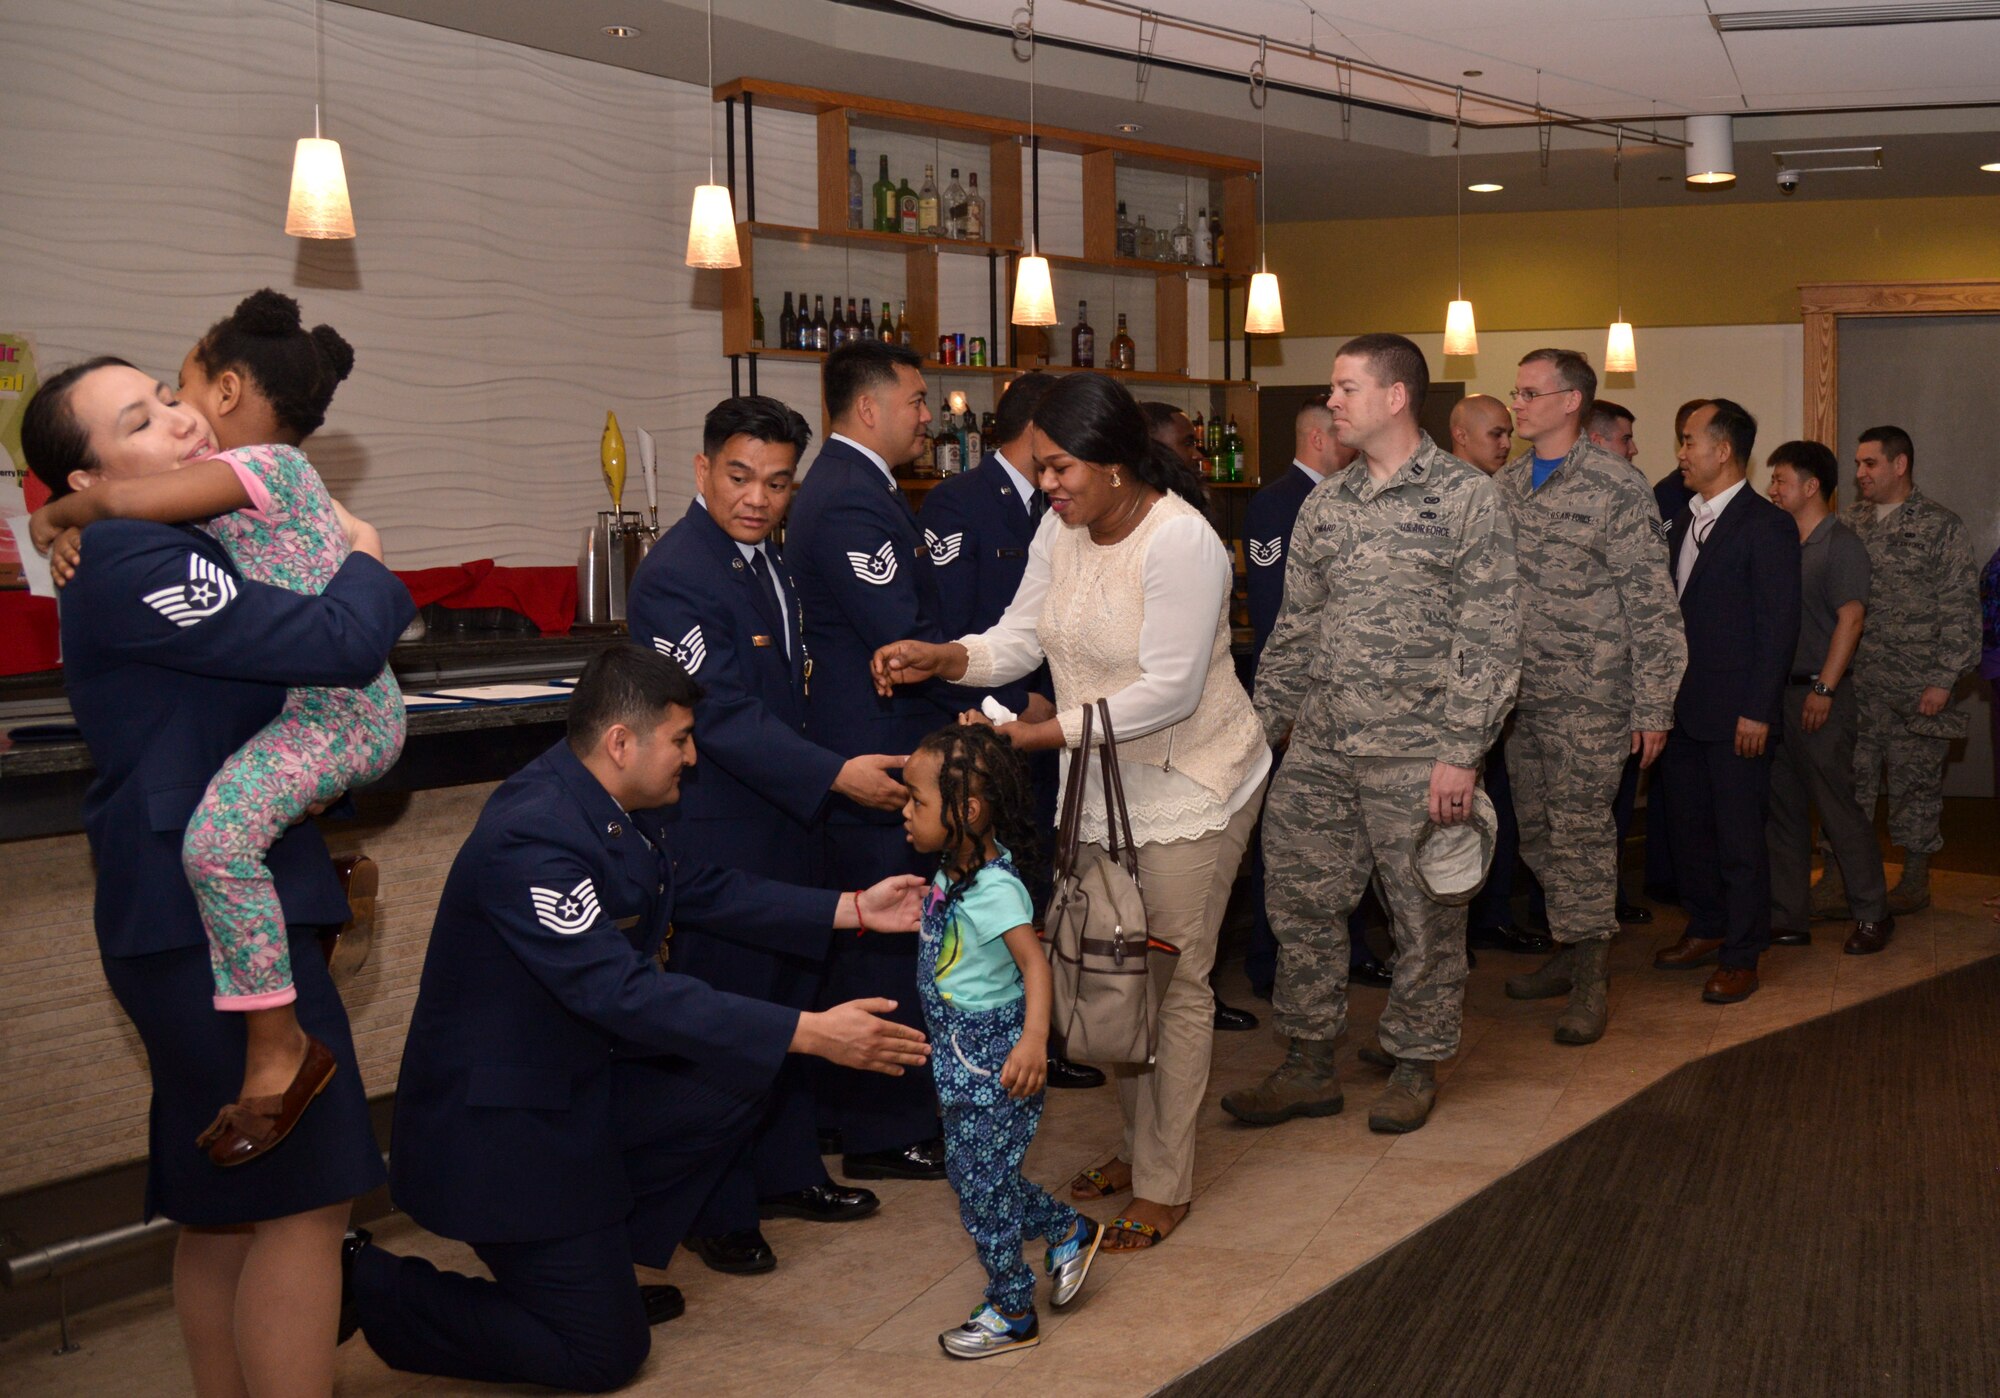 The Enyioko family along with members of Team Osan line up to shake hands with the individuals involved in the Songtan fire rescue after a recognition ceremony at Osan Air Base, Republic of Korea, May 13, 2016. Each Airman and Soldier involved with the rescue received an Air Force Commendation Medal and the civilian received a Command Civilian Award For Valor. (U.S. Air Force photo by Tech. Sgt. Travis Edwards)